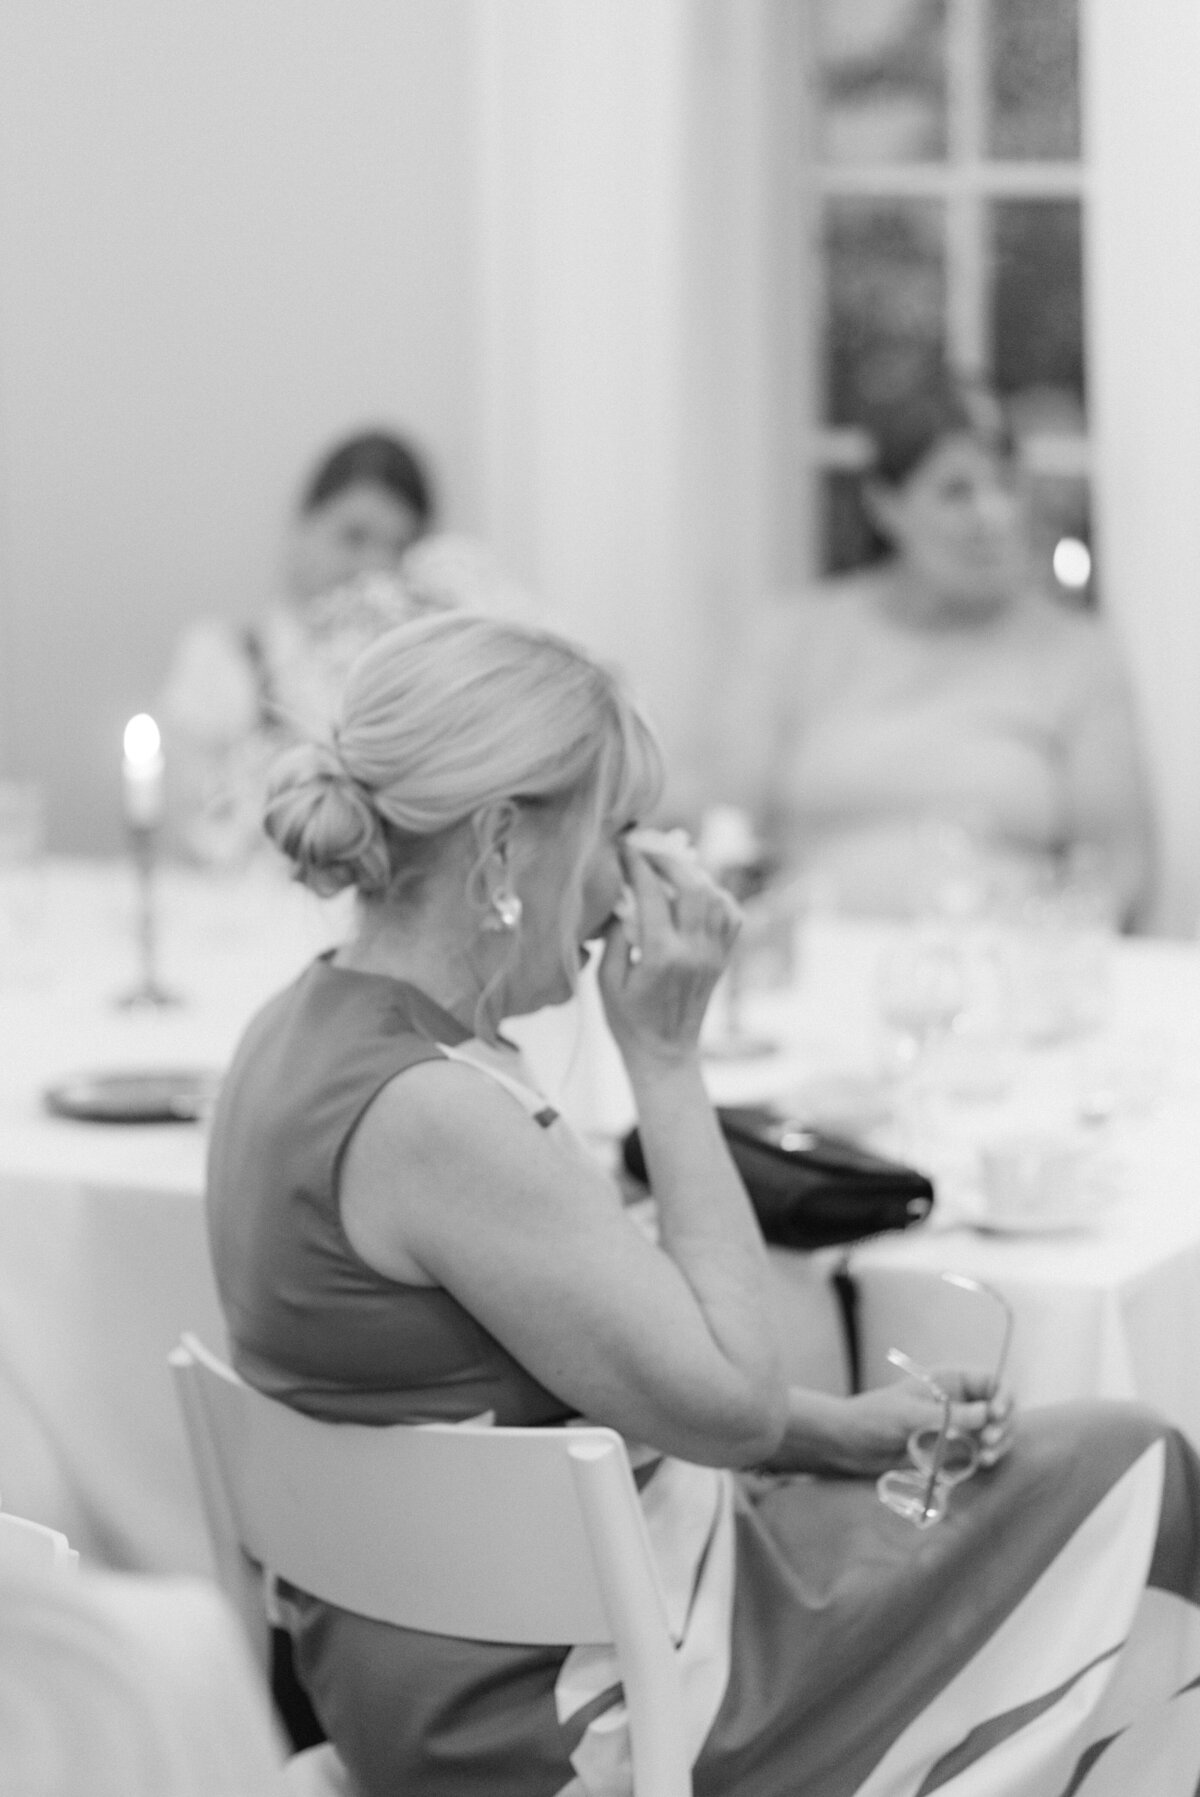 Documentary wedding photograph of a wedding guest listening to a speech to bride and groom in Airisniemi manor in Turku, Finland. Atmosphere captured by wedding photographer Hannika Gabrielsson.